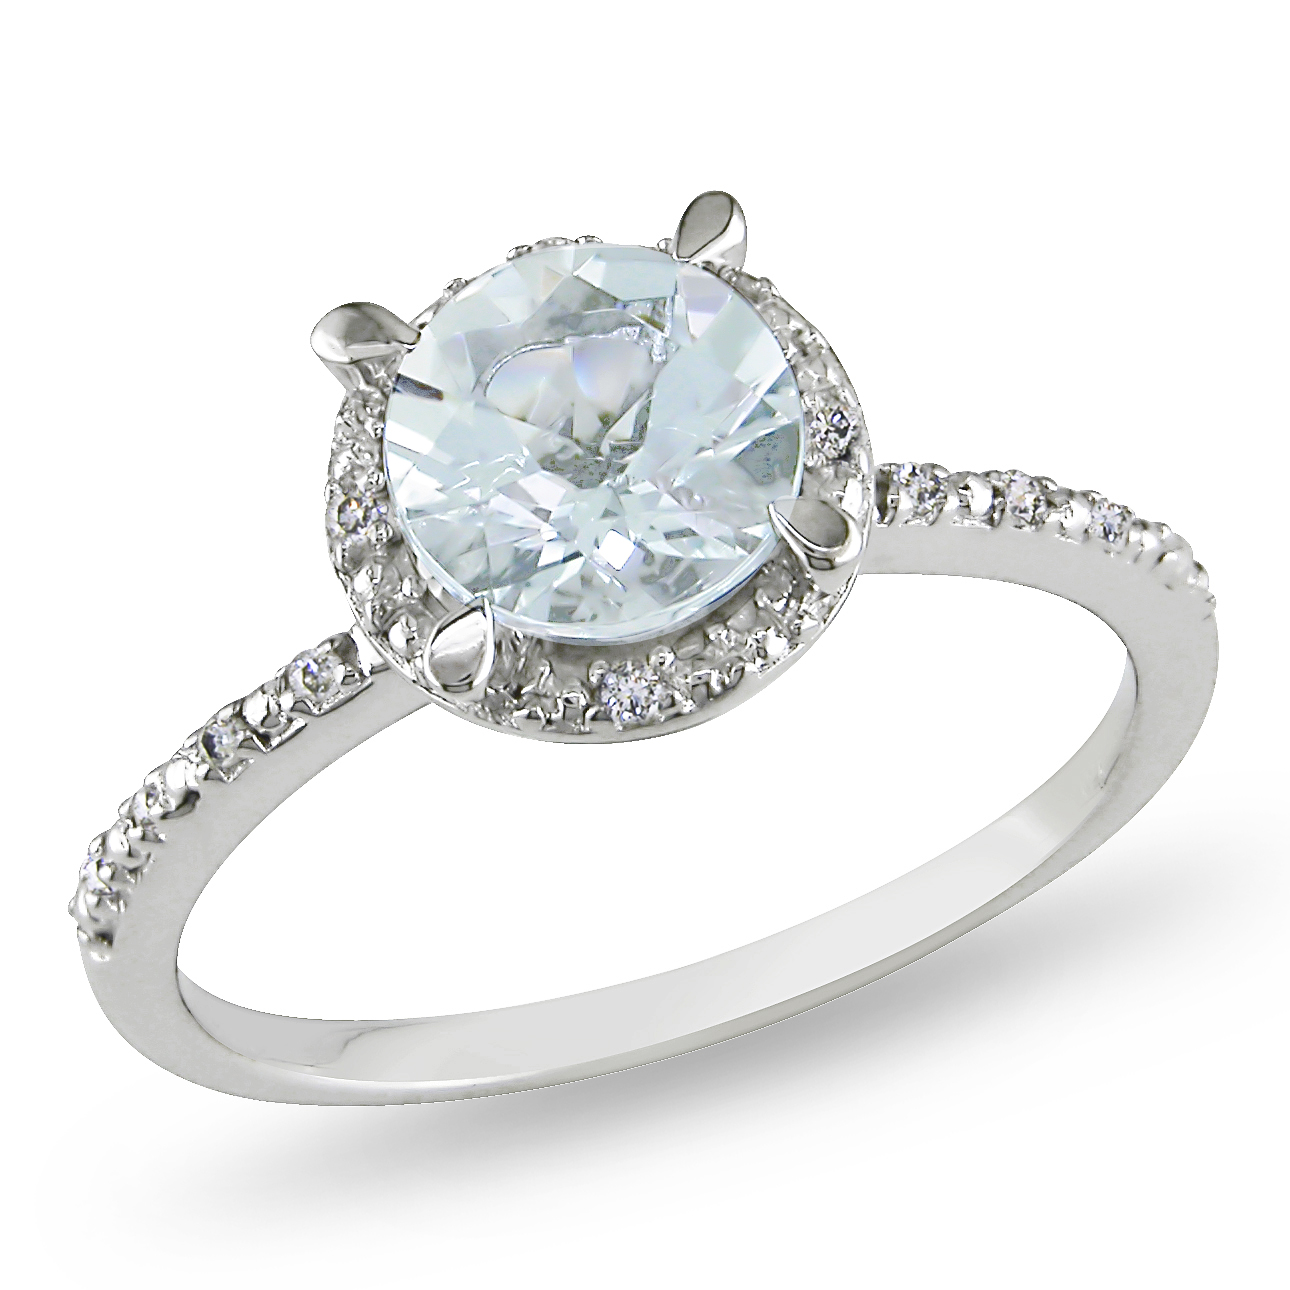 Amour 0.05 Carat T.W. Diamond and 1 1/7 Carat T.G.W. Aquamarine Fashion Ring in Sterling Silver GH I3